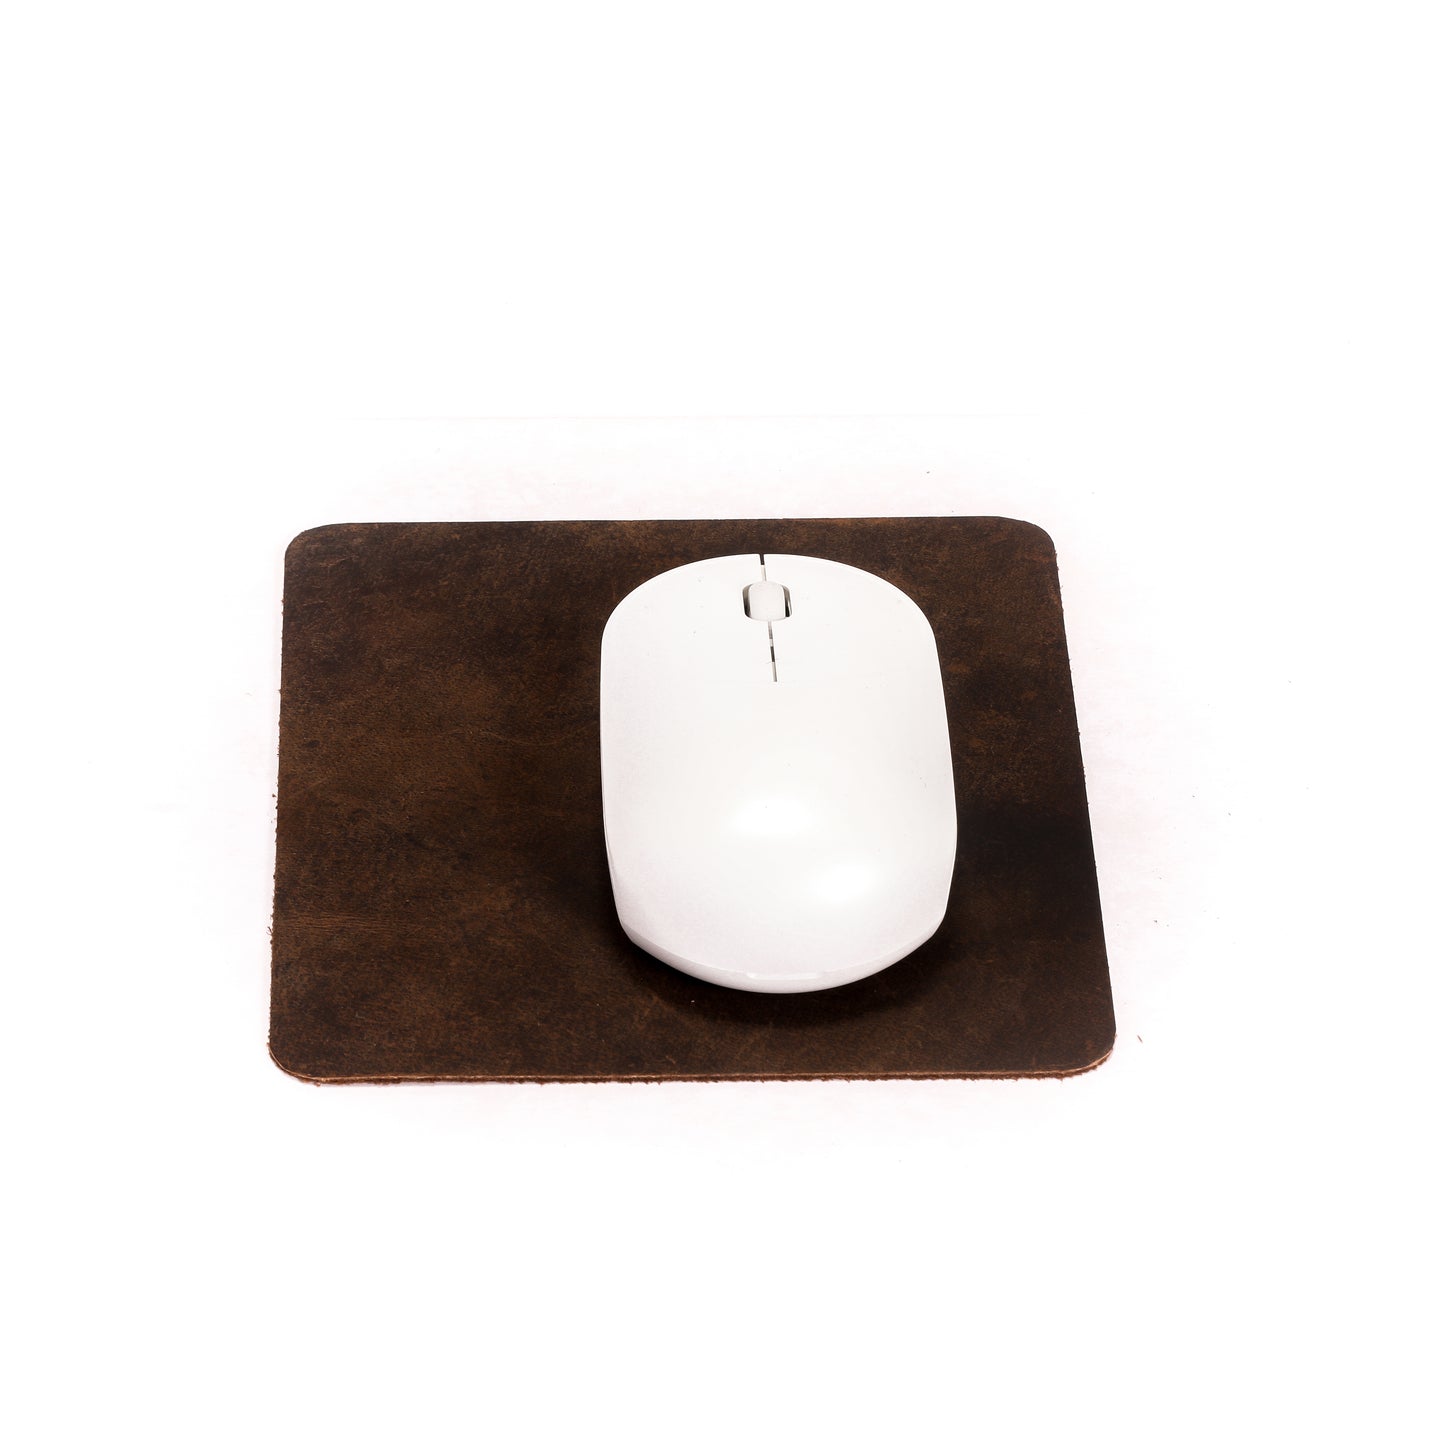 Glide - Leather Mouse Pad - Small